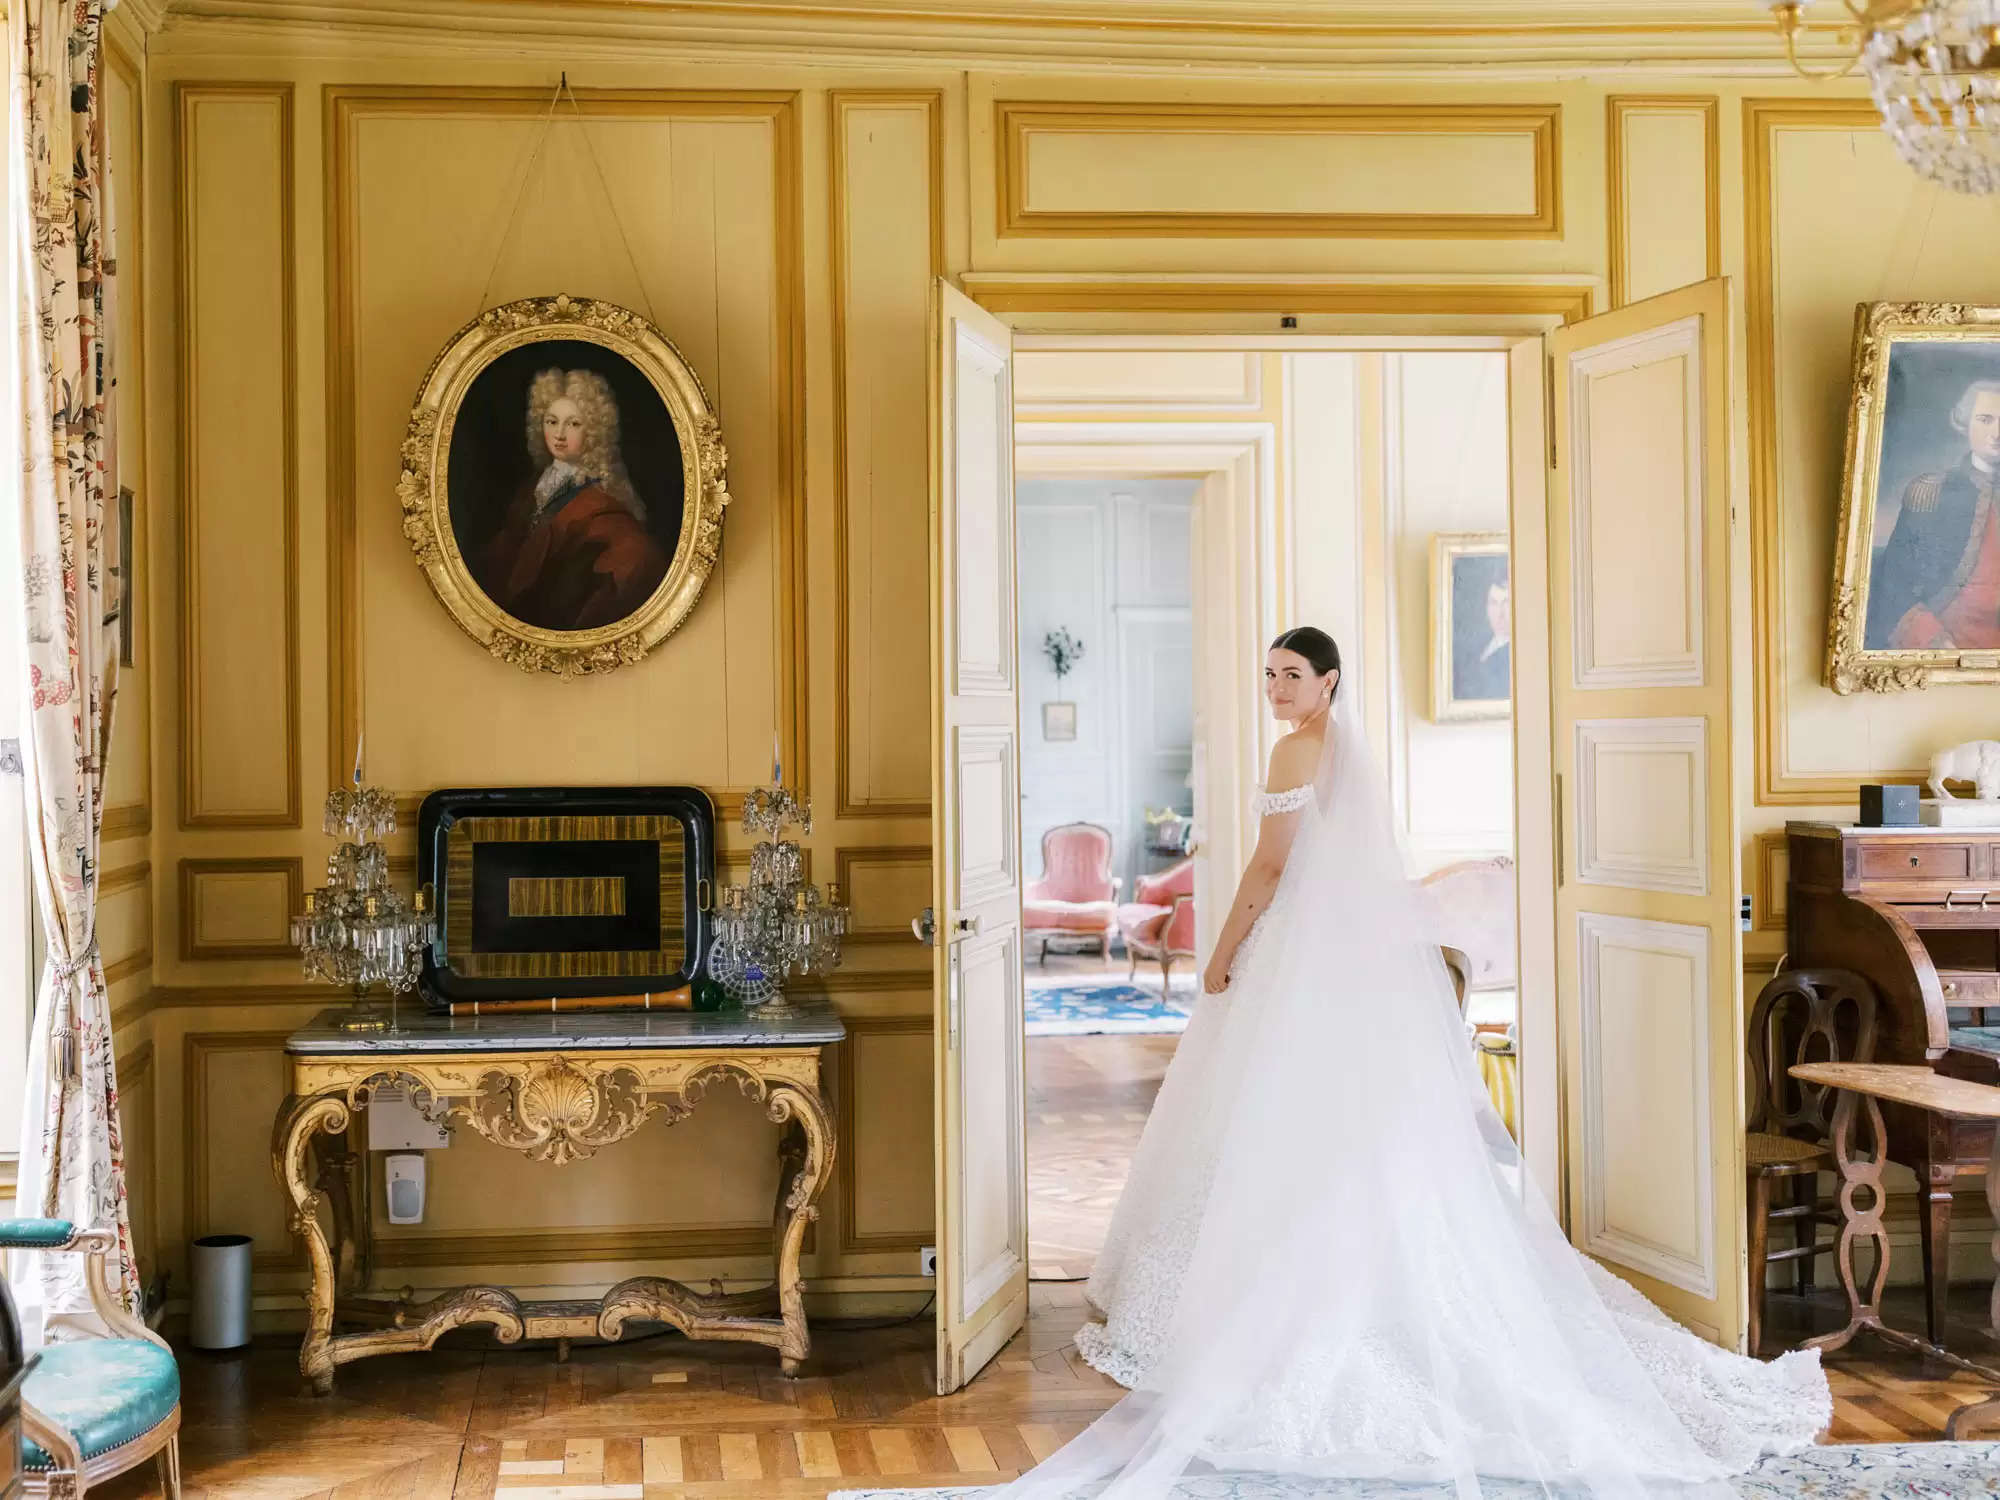 Chateau Bouthonvilliers Wedding ceremony Images Black-Tie Occasion